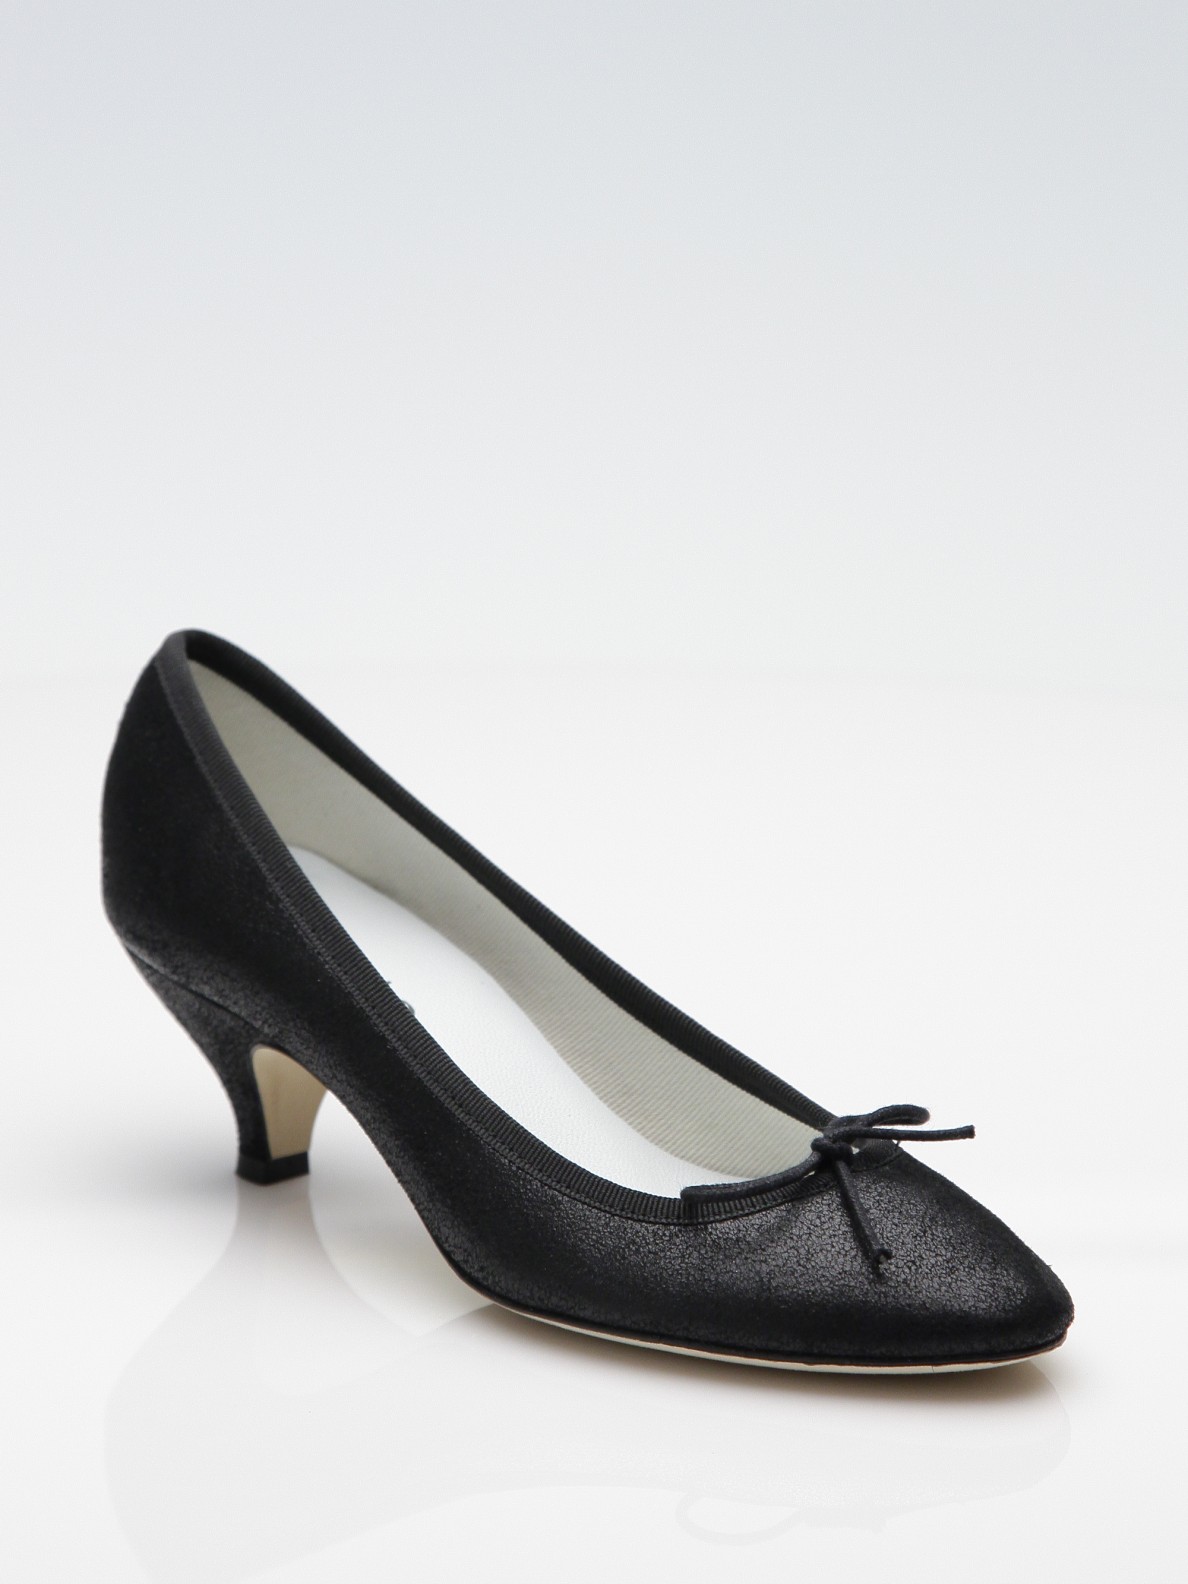 Repetto Gisele Suede Ballet Pumps in Black - Lyst